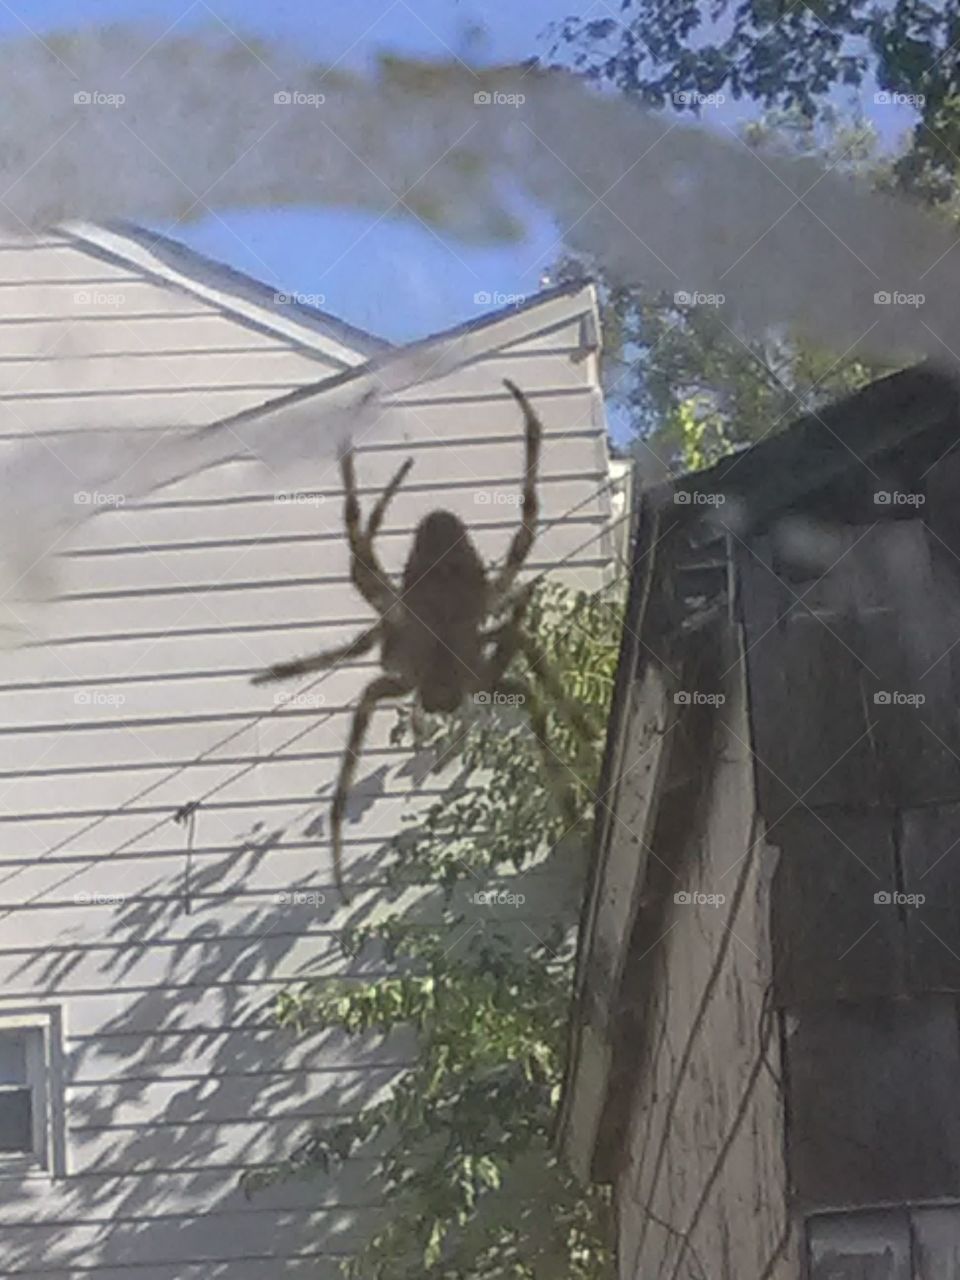 A really huge Cool looking spider that was luckily outside the window and not inside I hate spider's